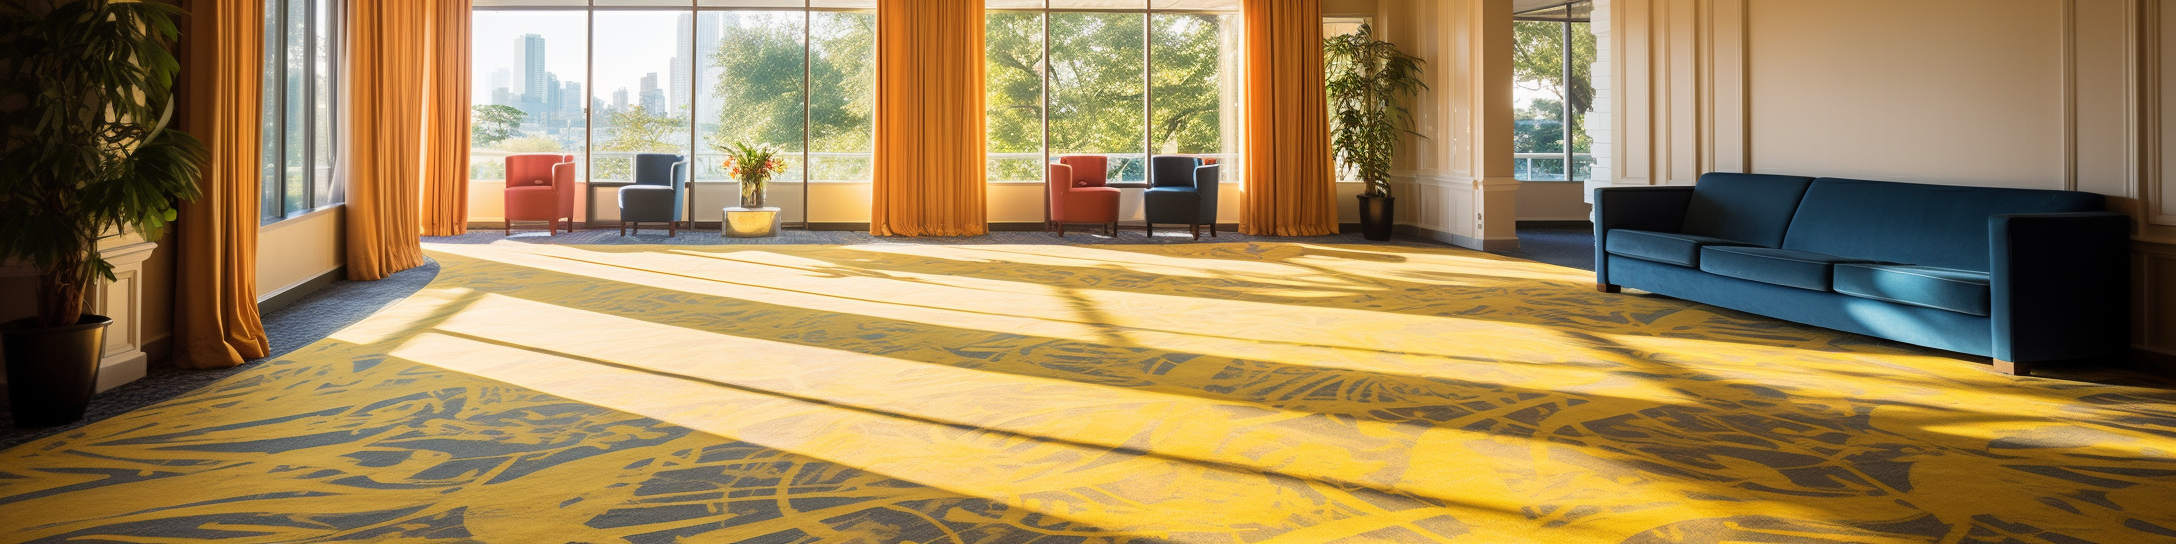 Professional Carpet Cleaning Services for Hotels and Resorts